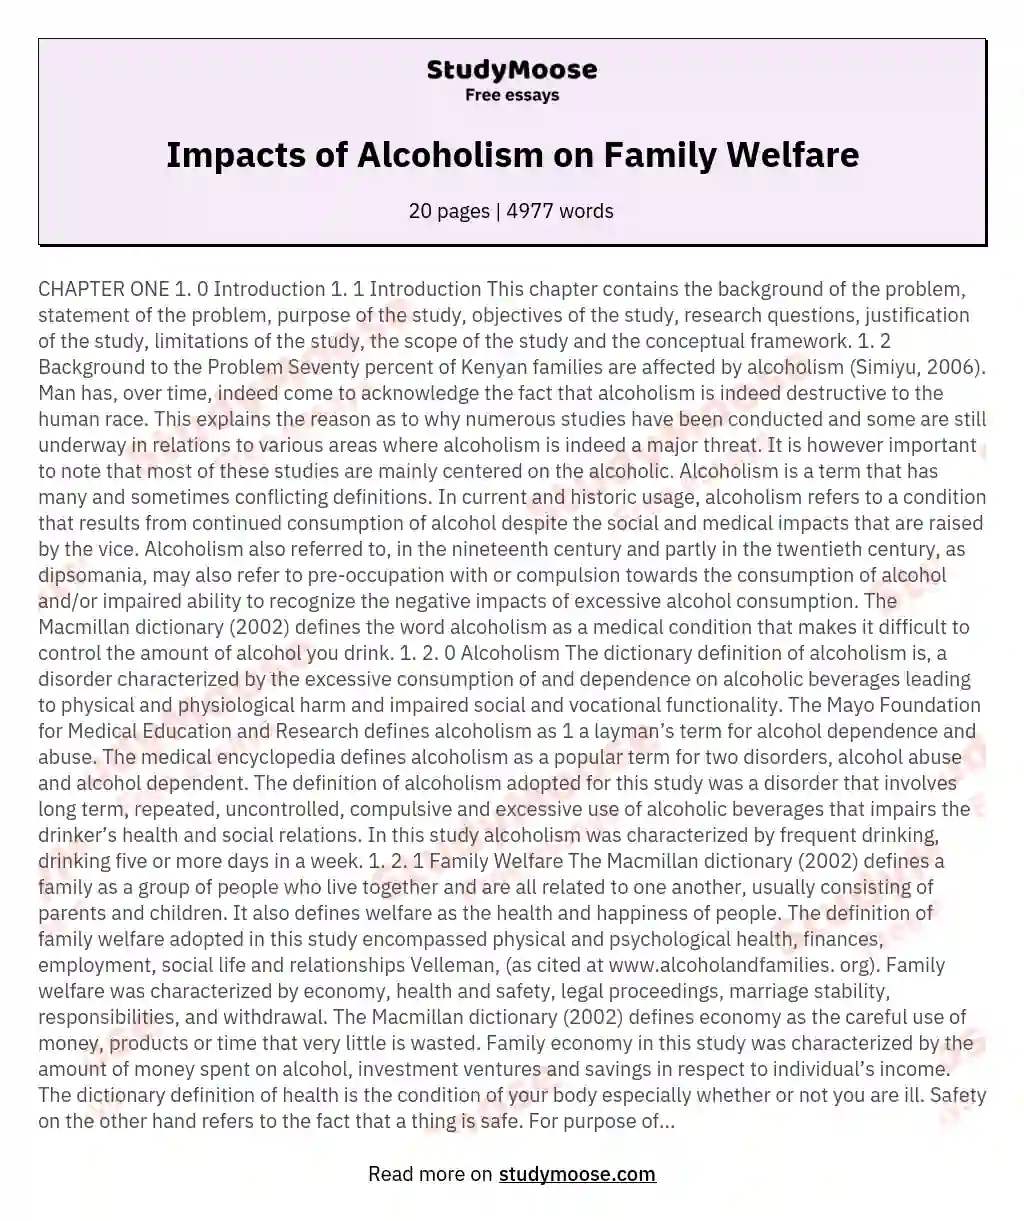 Impacts of Alcoholism on Family Welfare